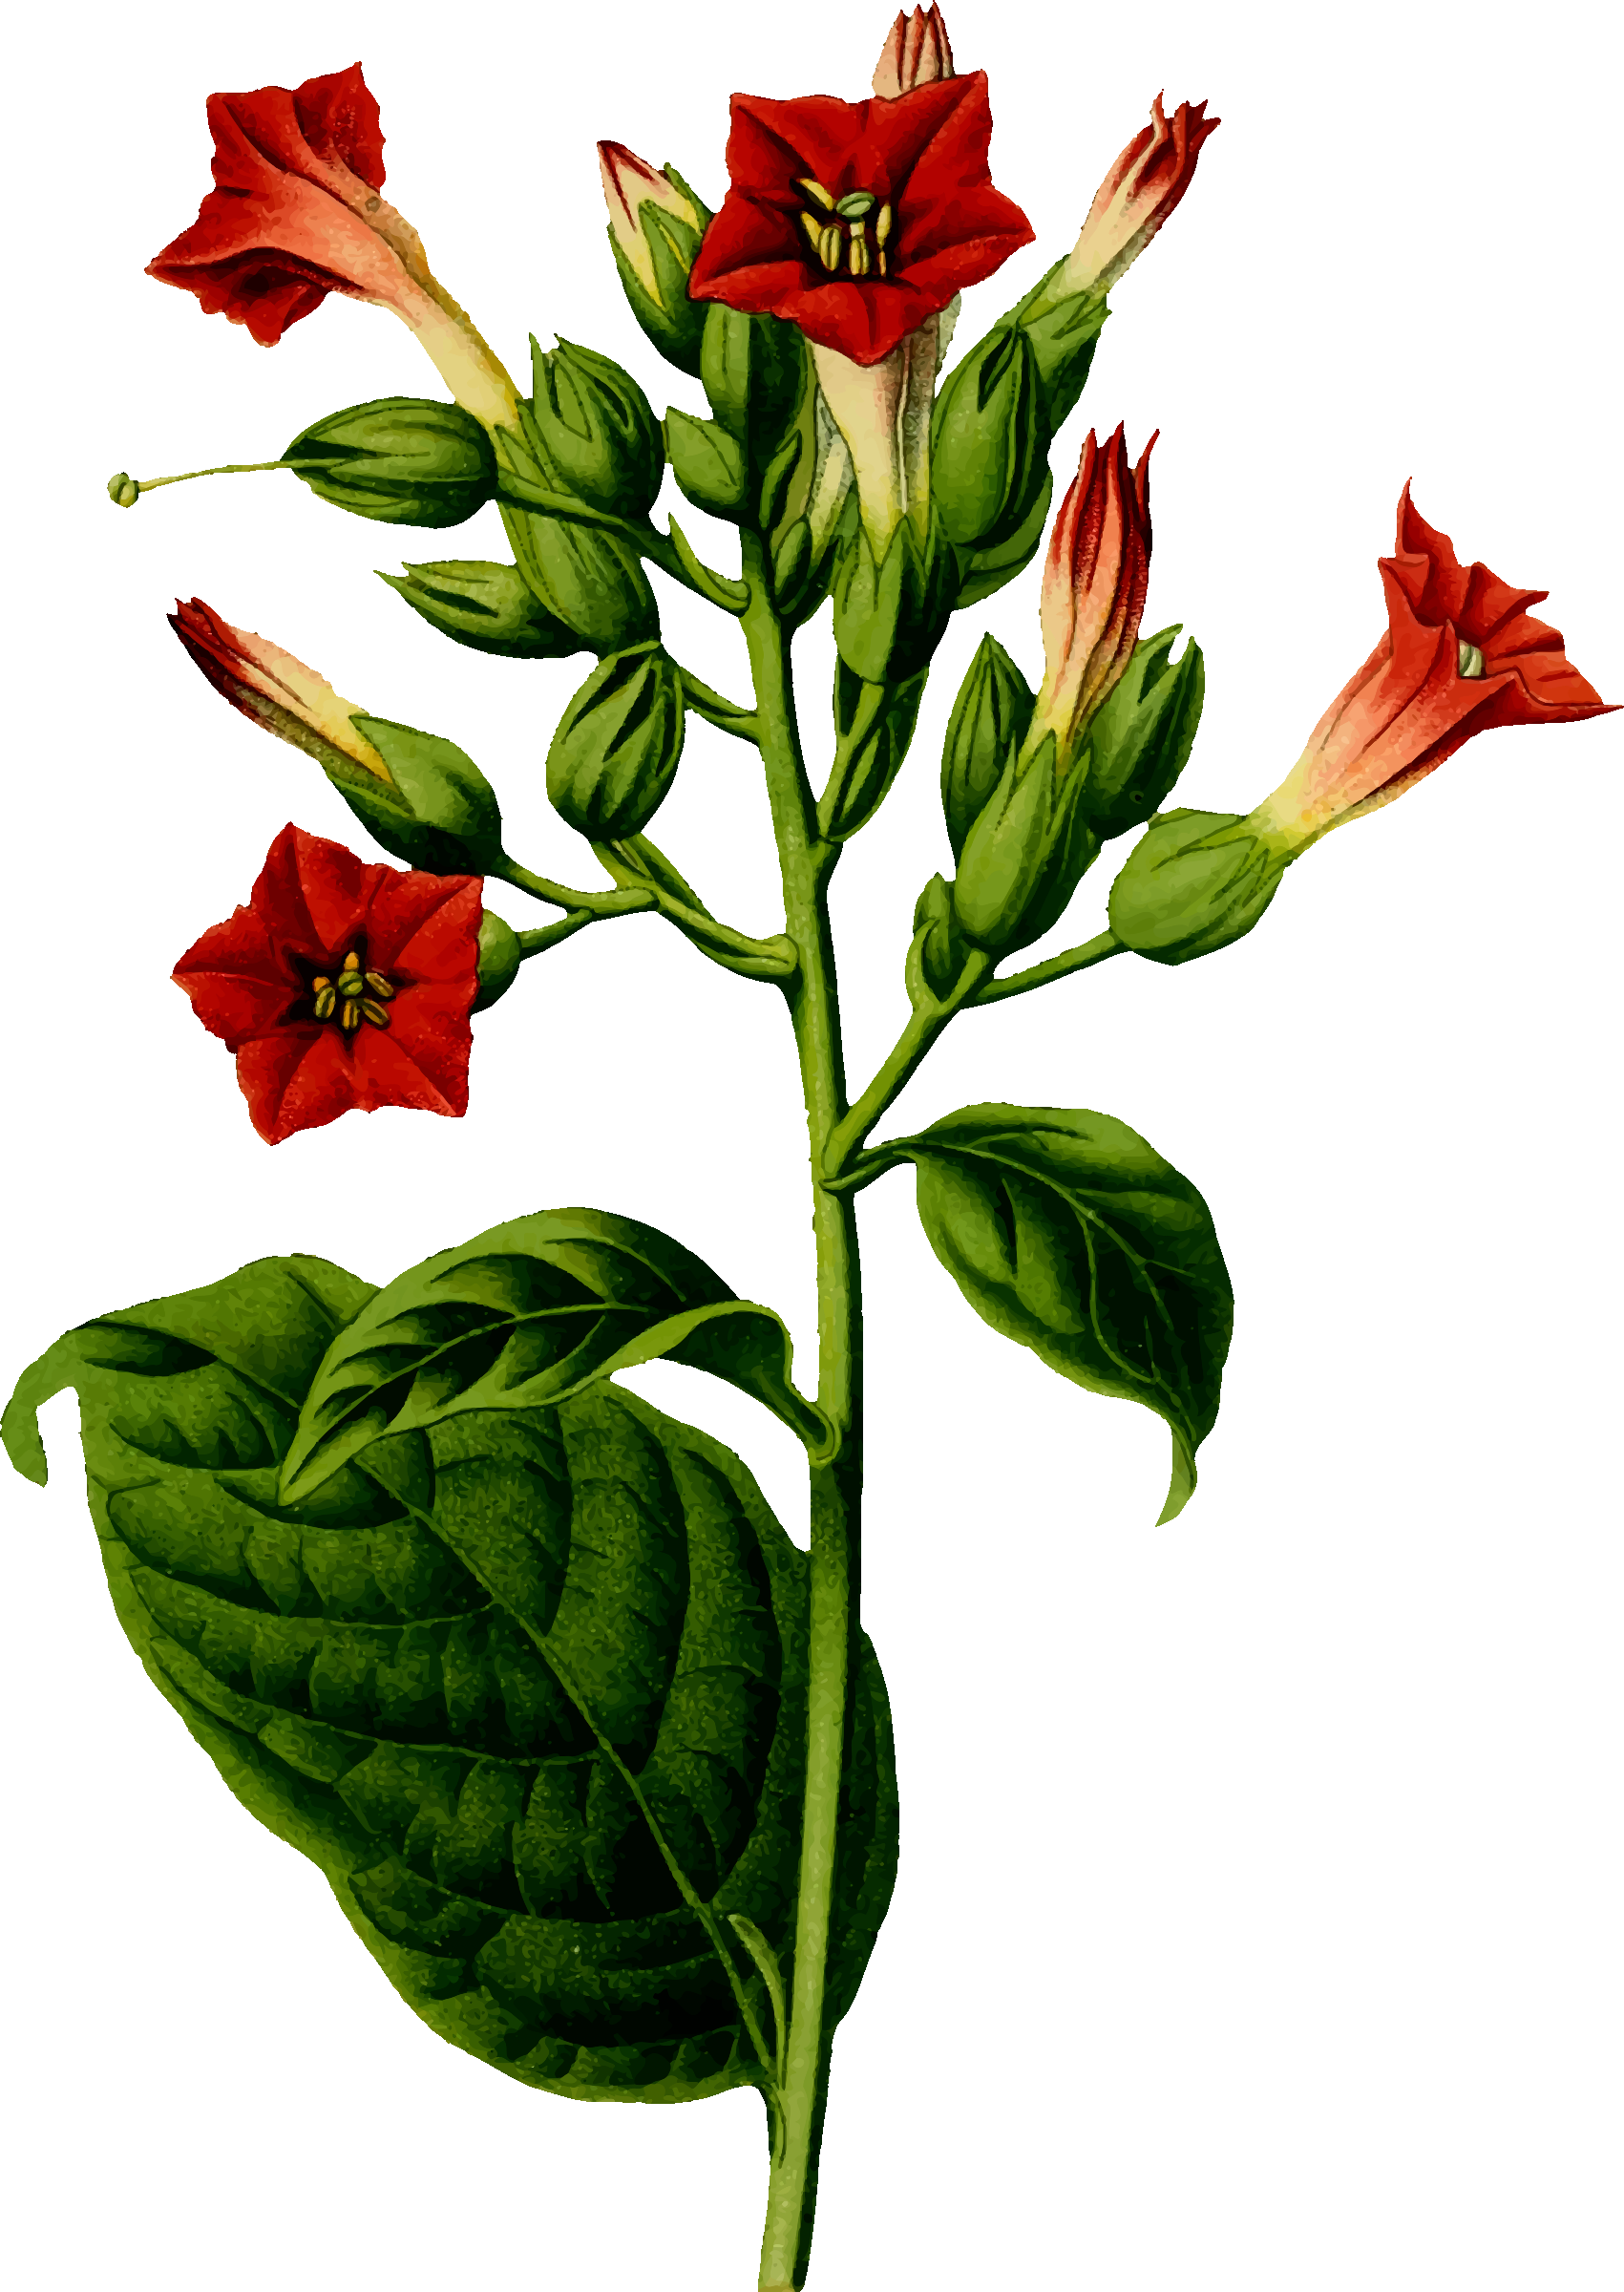 Big image png. Seedling clipart tobacco plant